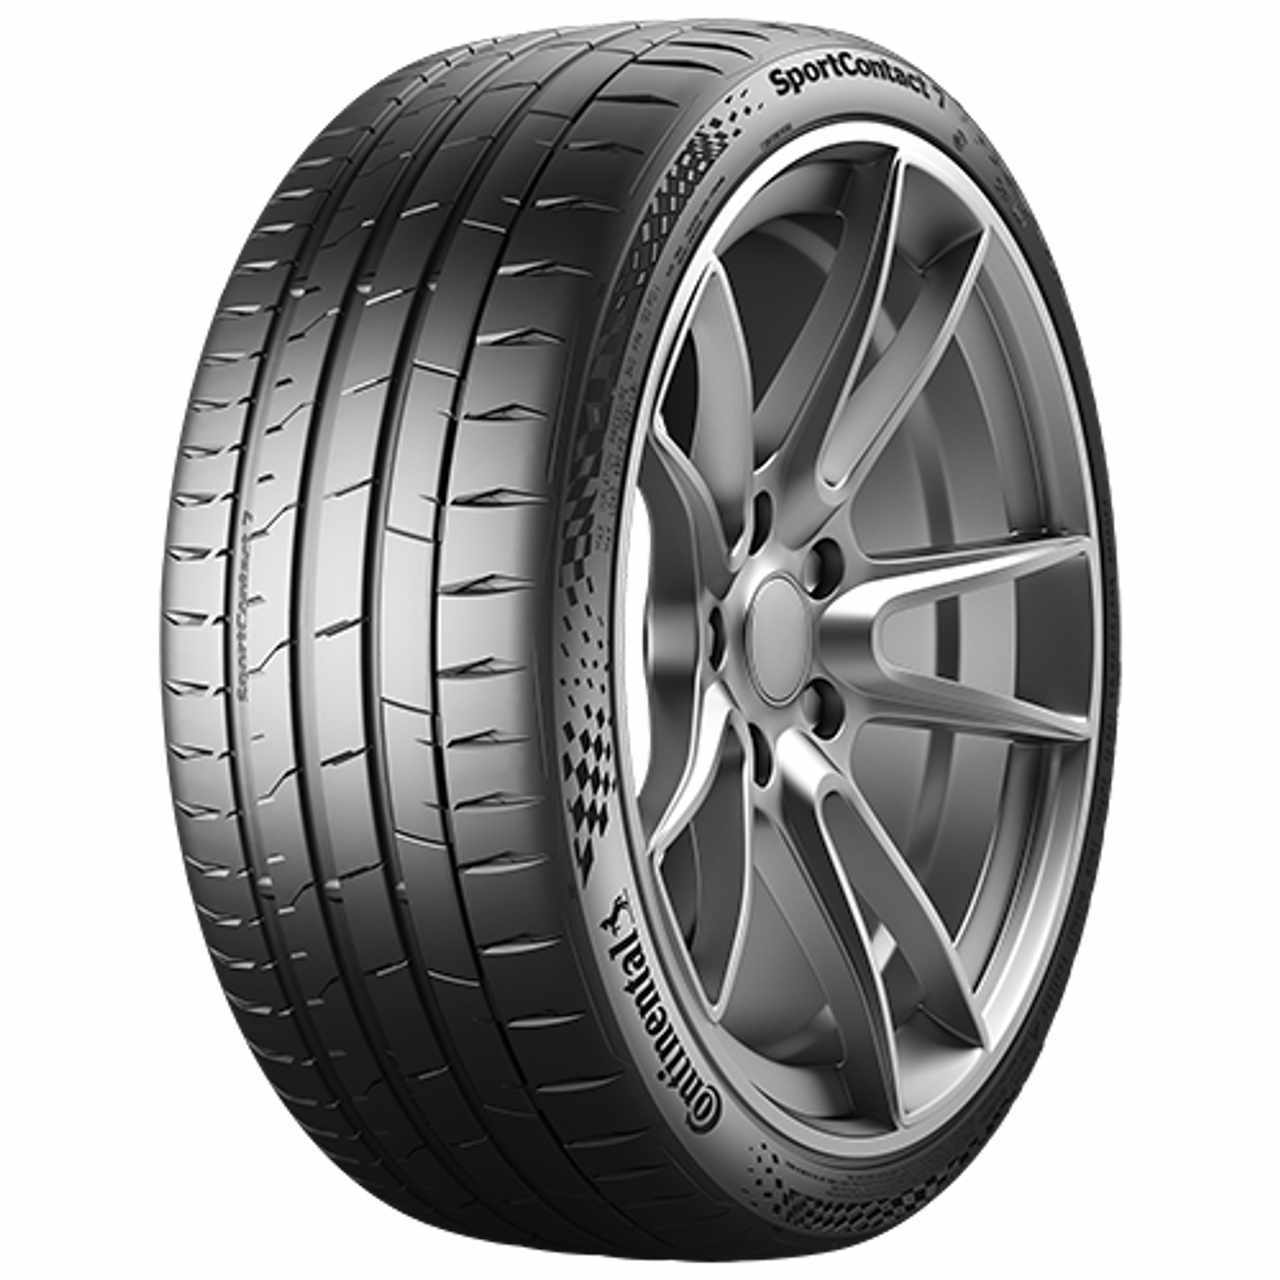 CONTINENTAL SPORTCONTACT 7 (MGT) (EVc) 295/35ZR21 103(Y) FR BSW